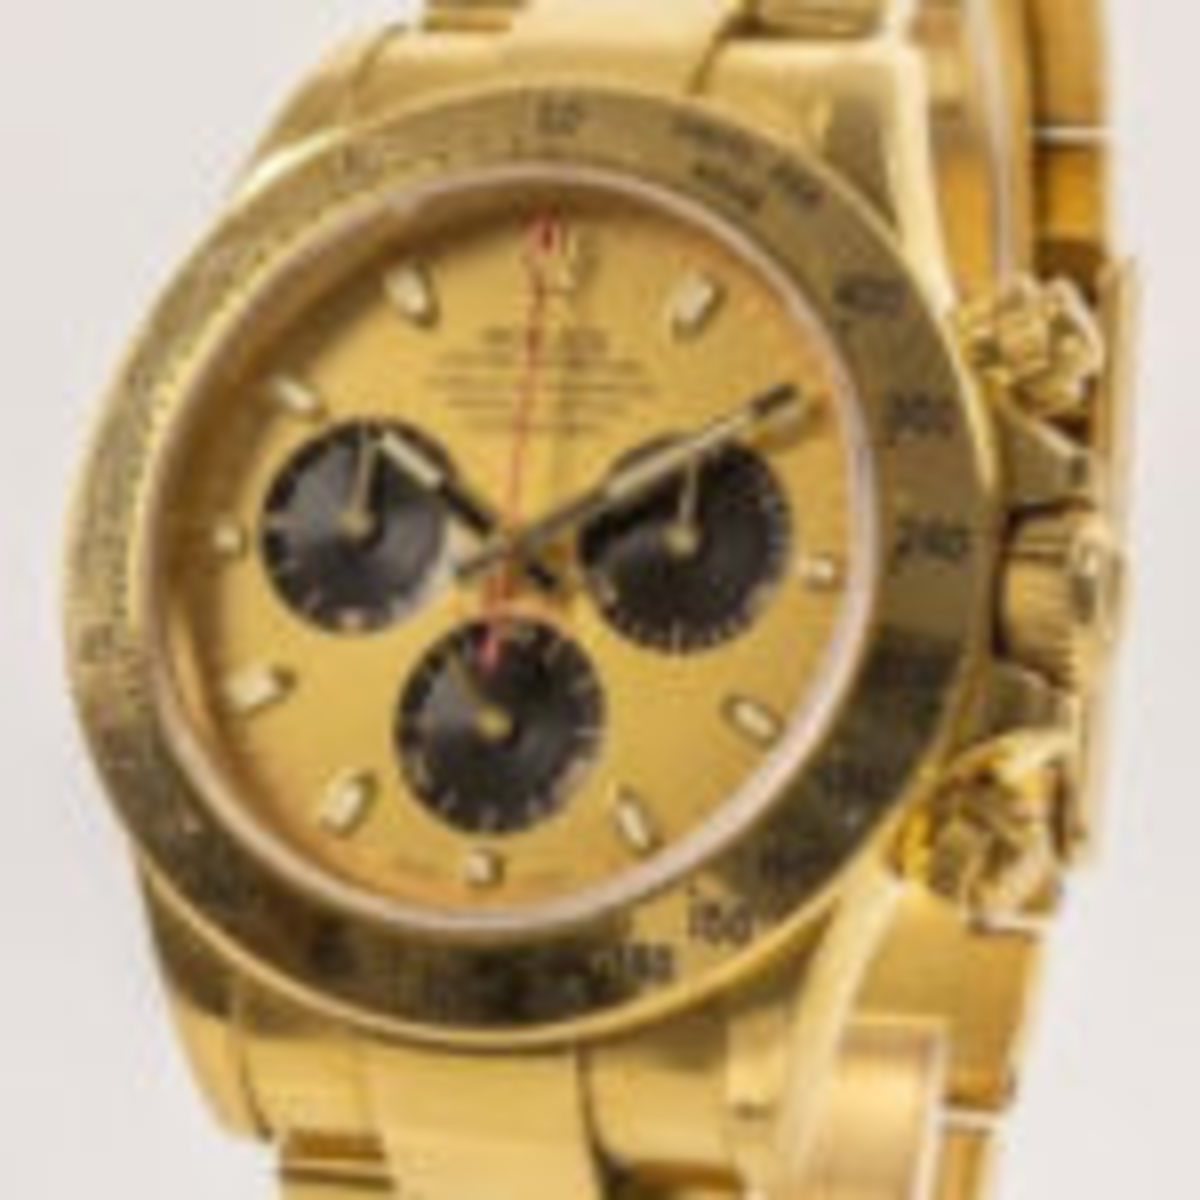 Lot 1 in the sale is a Rolex wristwatch: Rolex Cosmograph Daytona in 18K yellow gold, model 116528, 39mm case, serial no. D446753